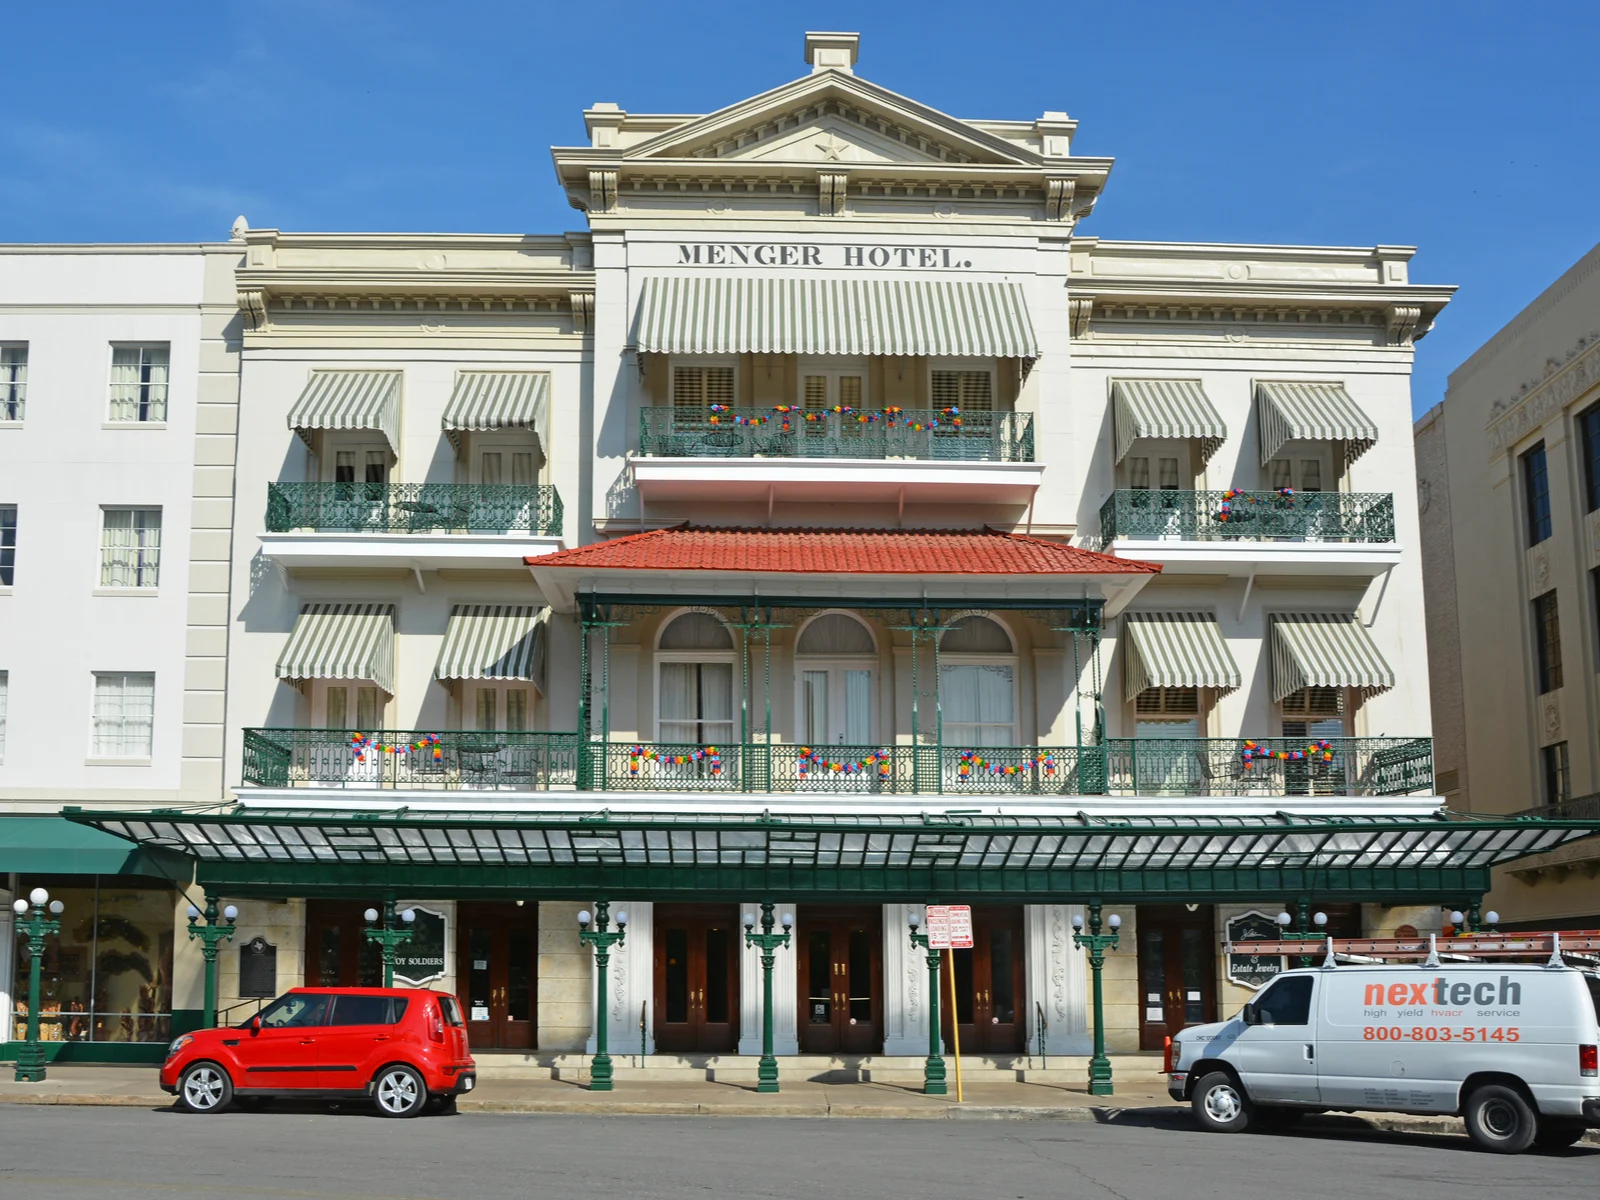 Menger hotel in San Antonio, one of the city's best attractions to see